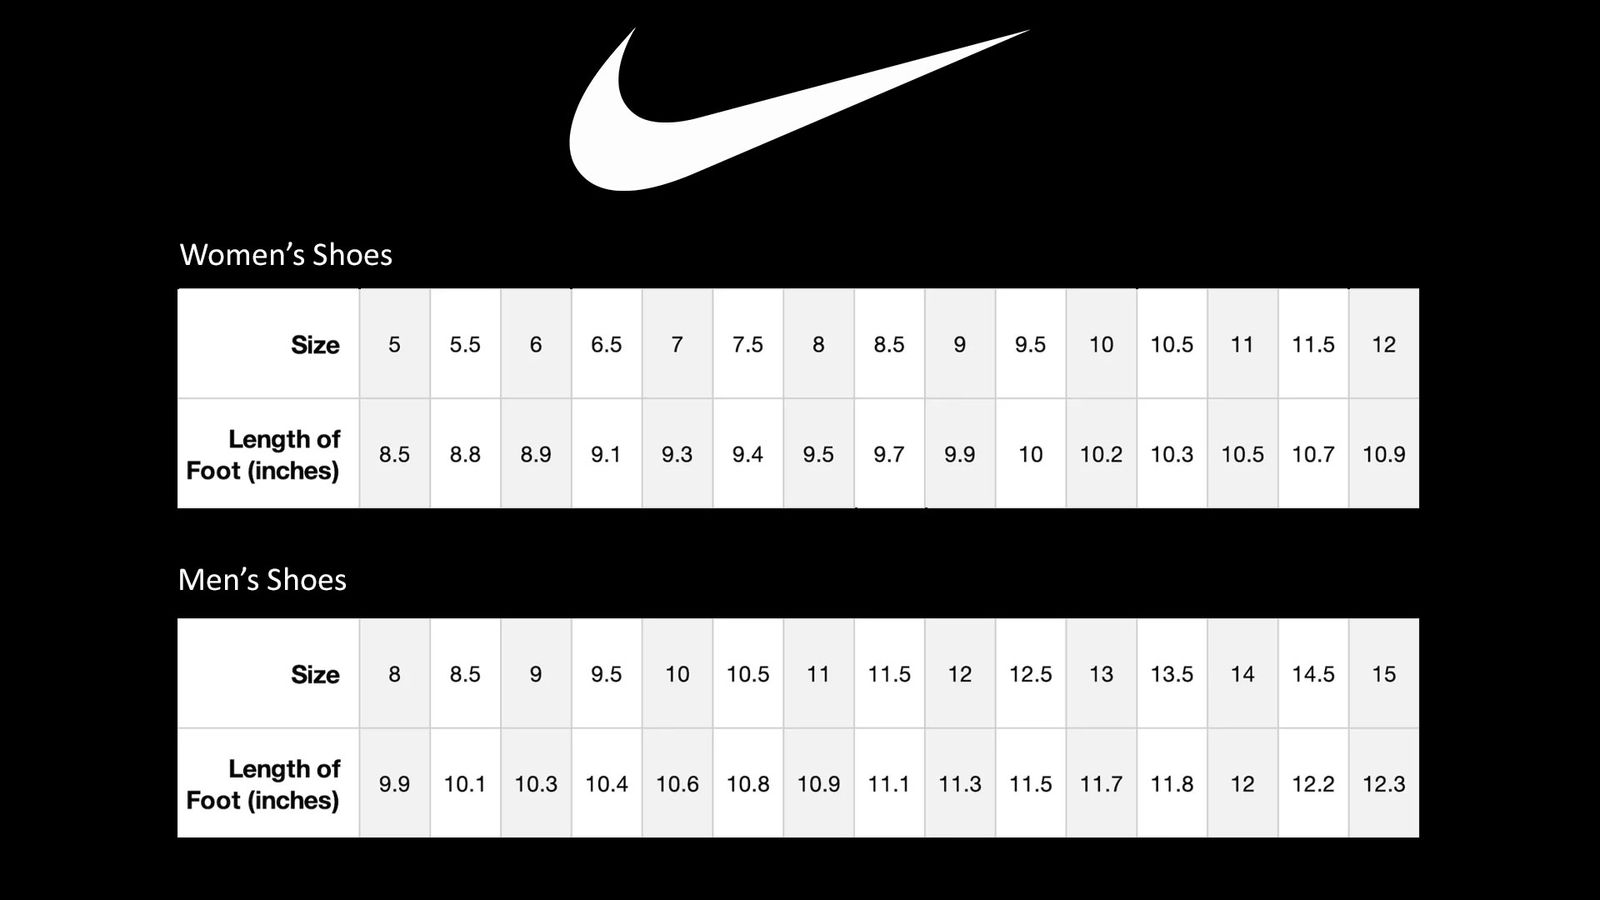 Nike size guide on women's and men's shoe sizes.